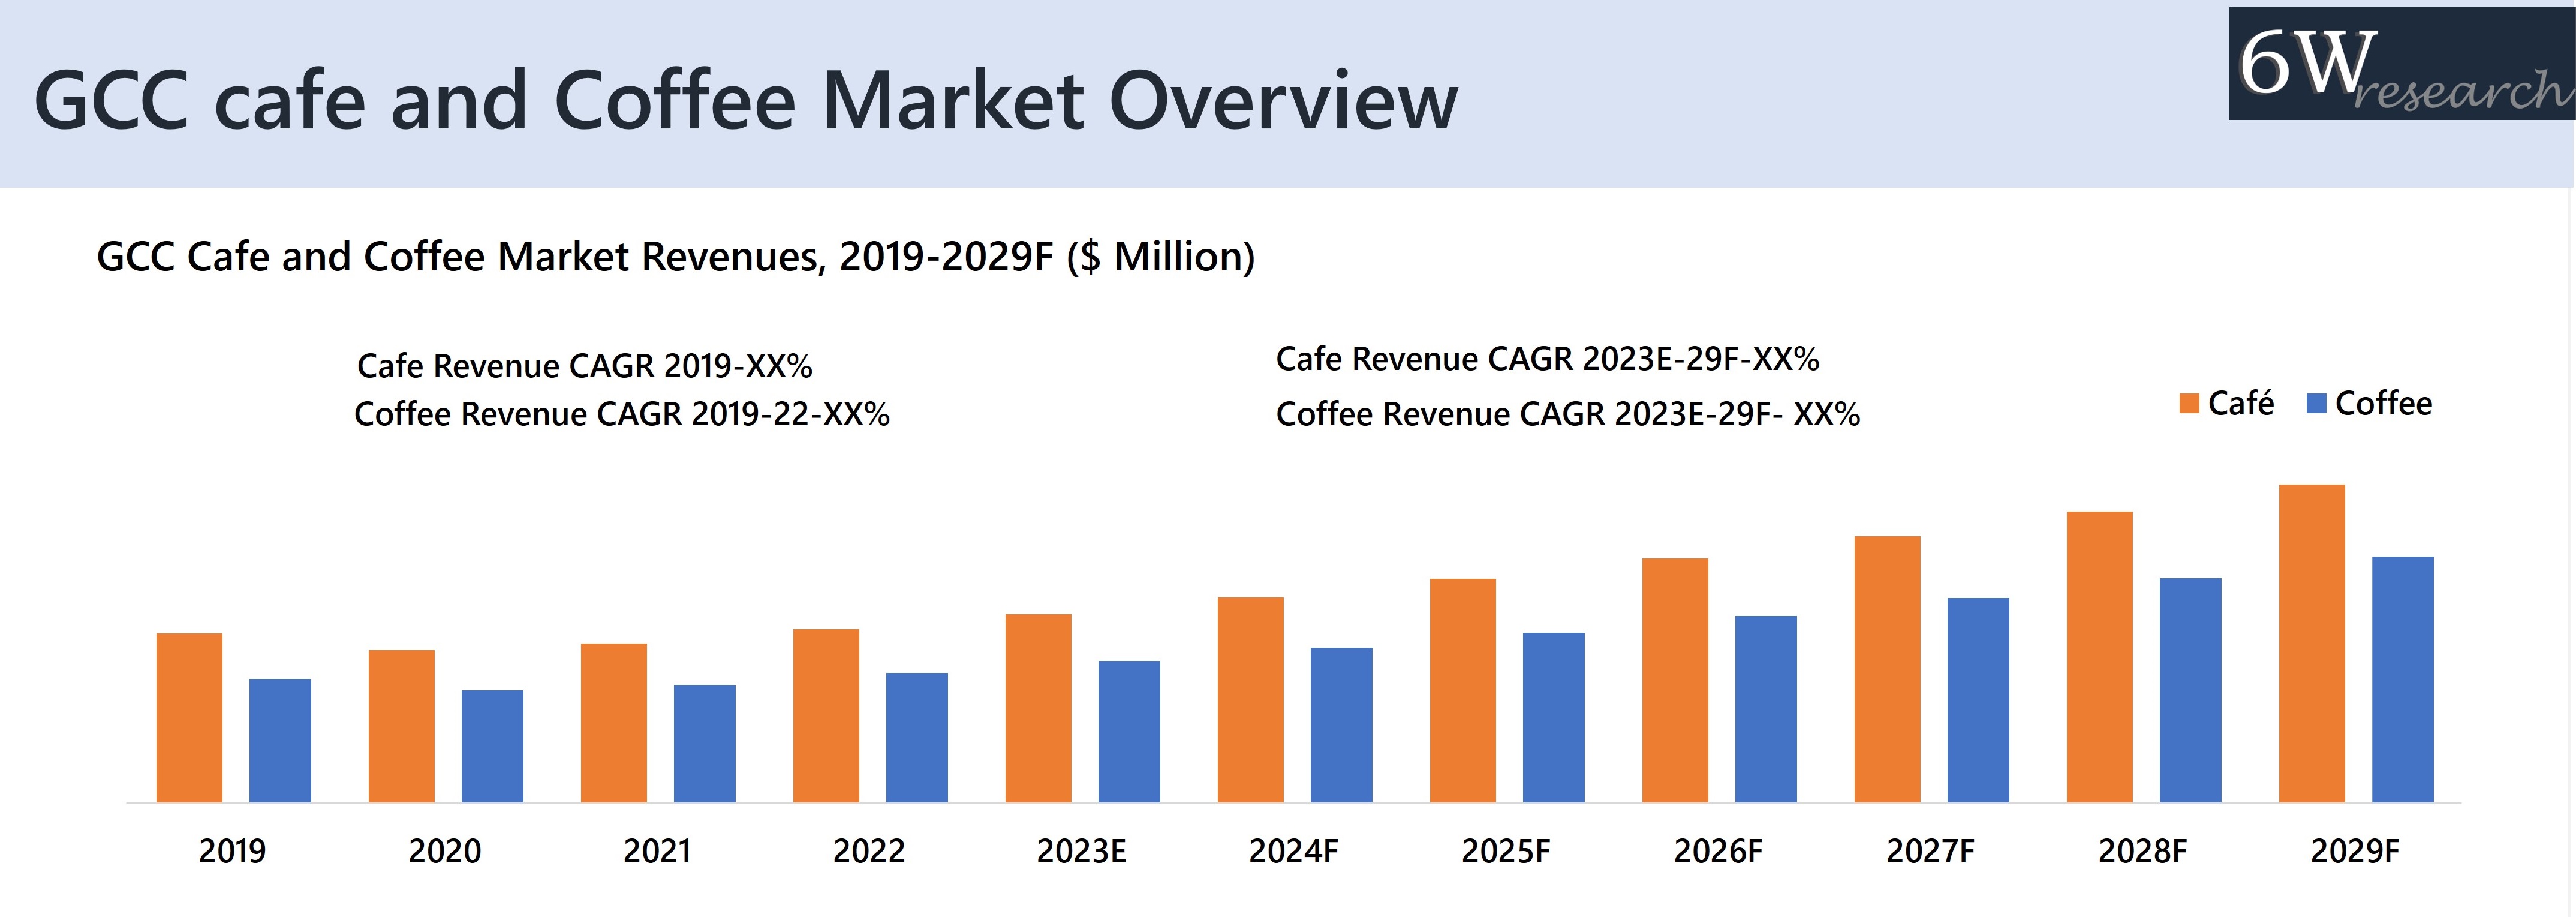 GCC cafe and Coffee Market Overview